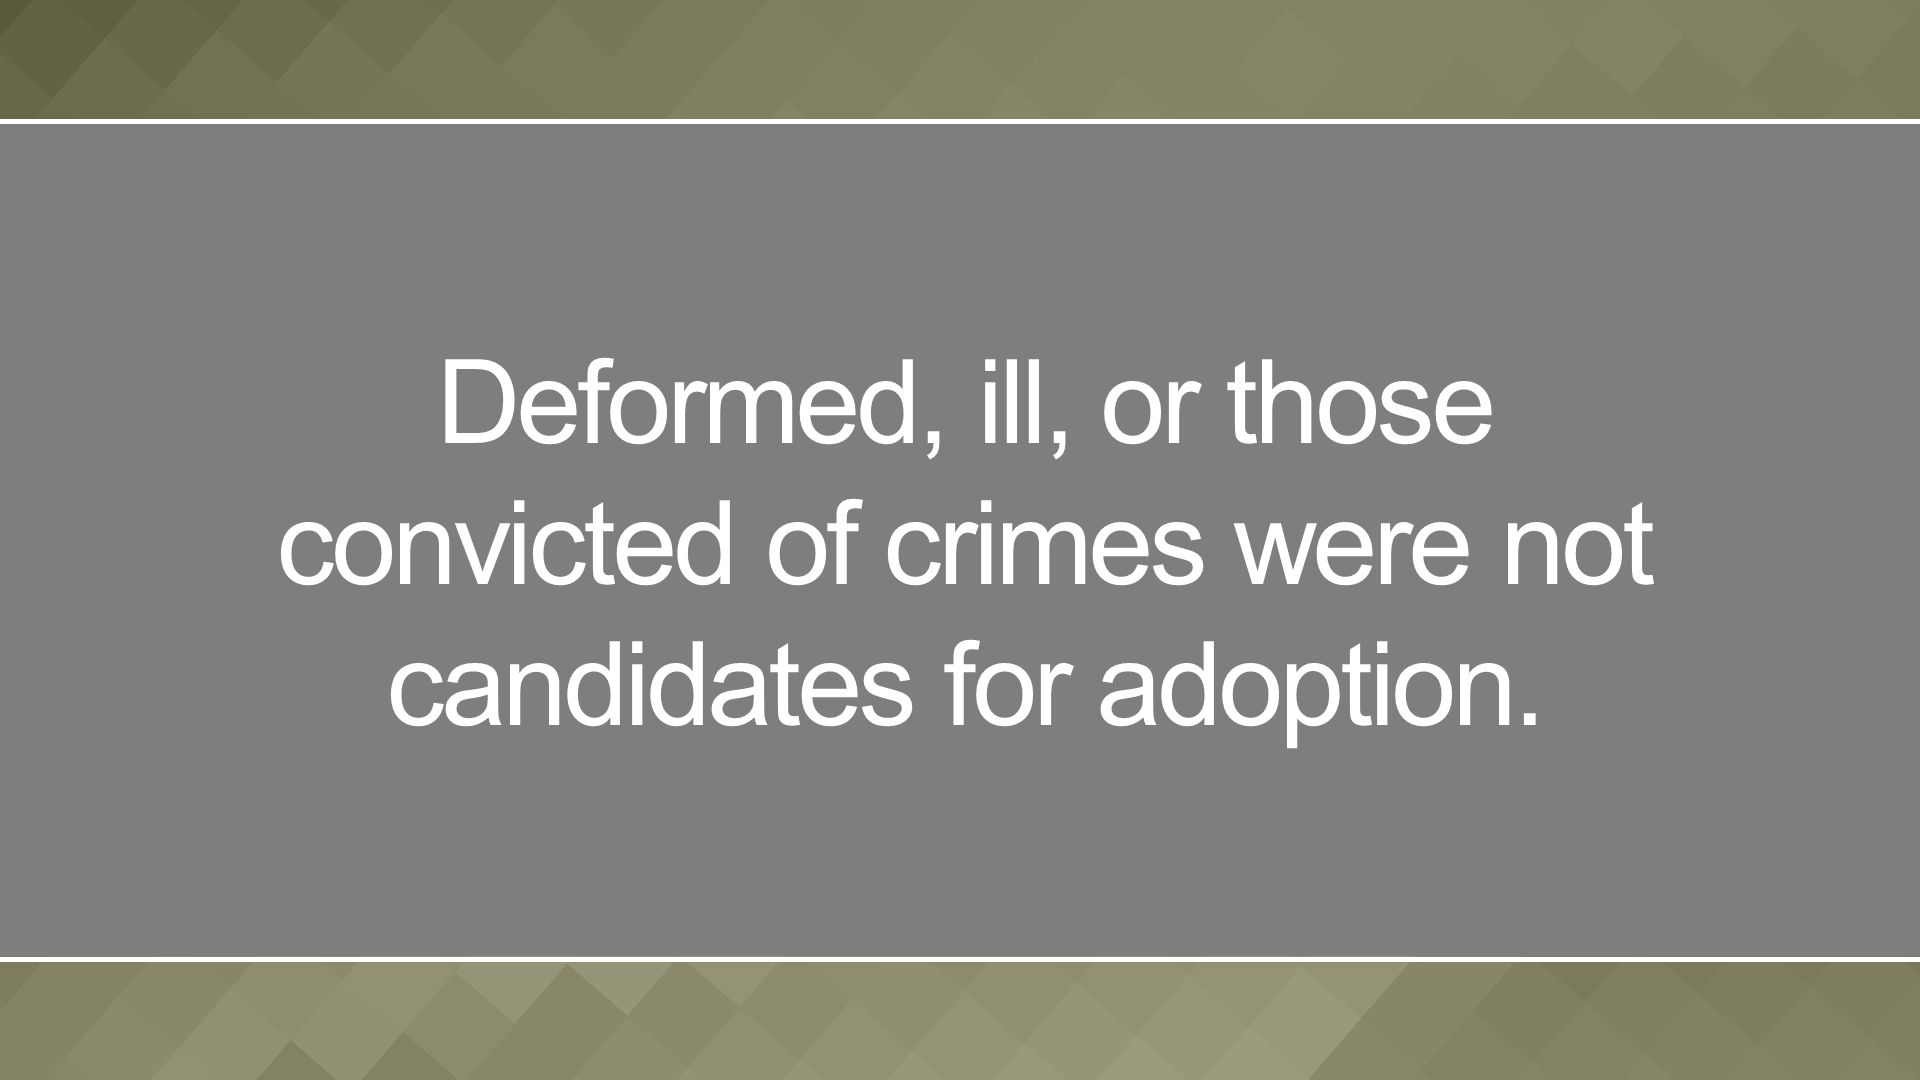 Deformed, ill, or those convicted of crimes were not candidates for adoption.